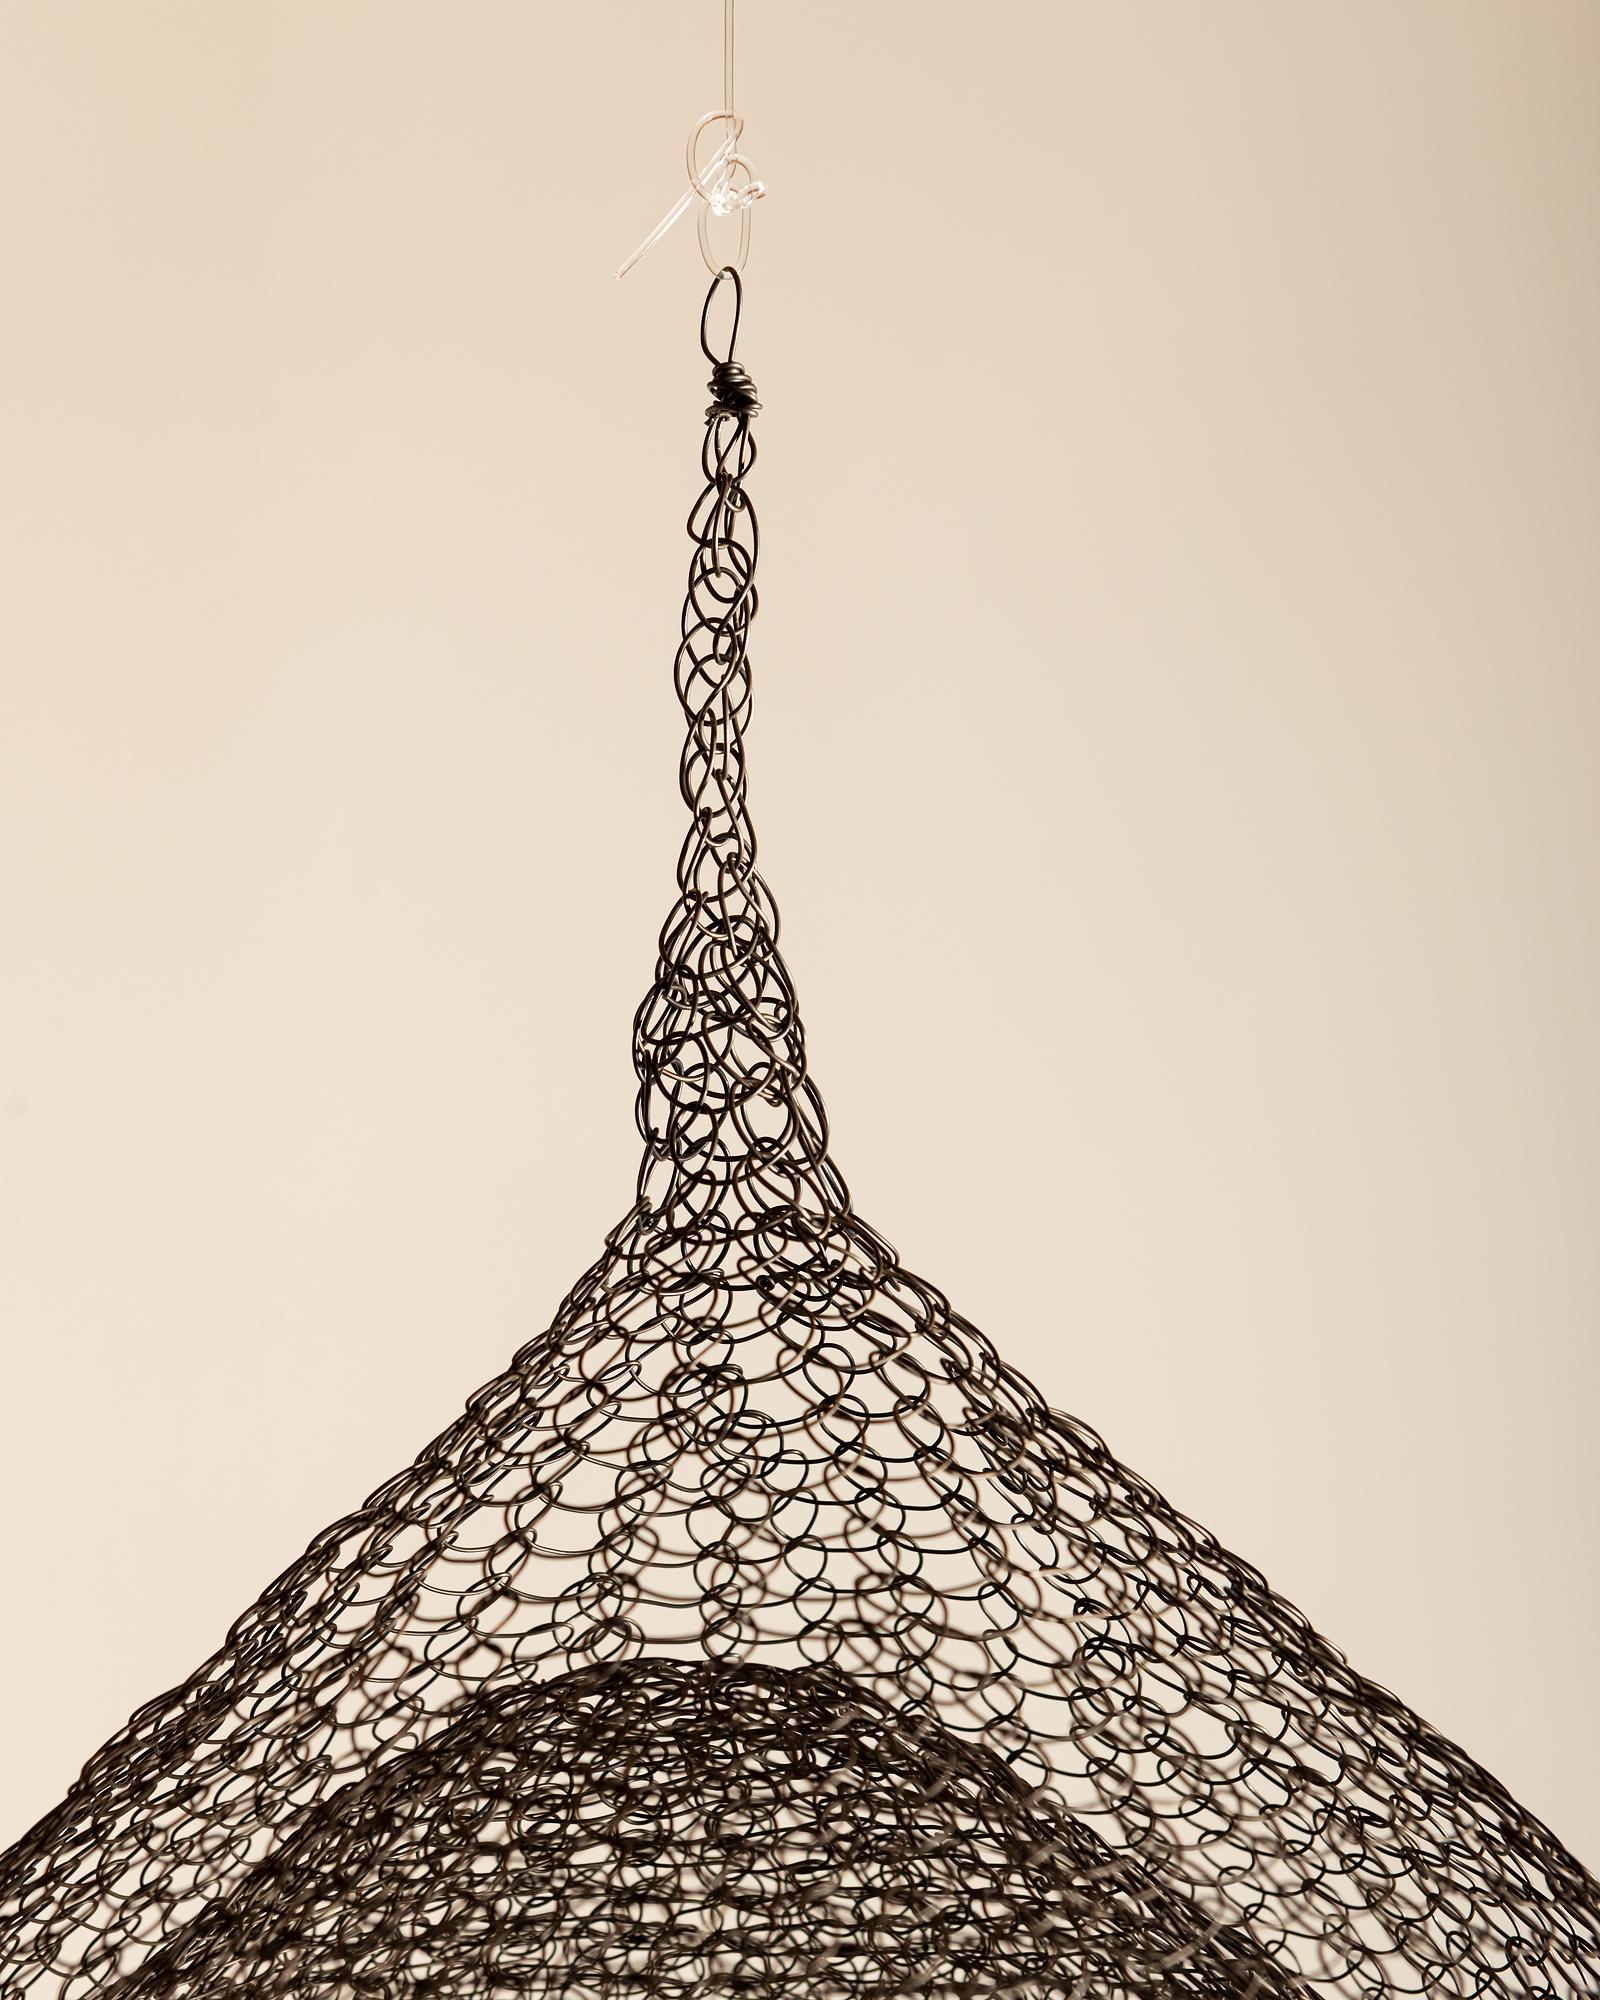 Contemporary Hanging Wire Sculpture by Katherine Hogan, Pacific Northwest, 2021